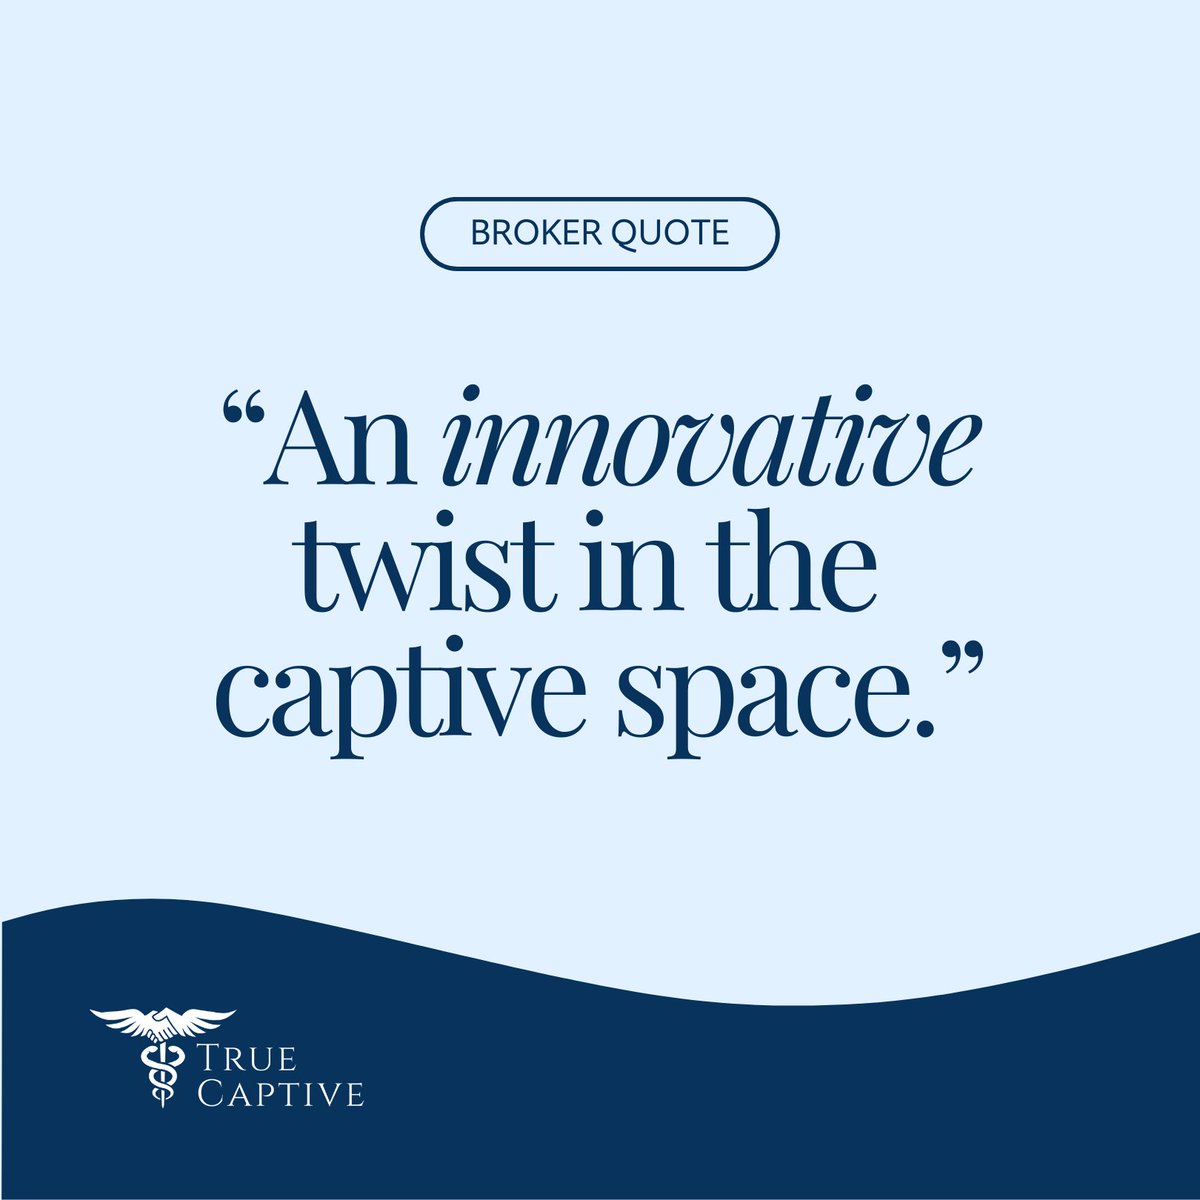 We asked brokers: How would you describe True Captive to a colleague or client?

The answer: 'An innovative twist in the captive space.' 🌪️

Make the seamless switch and schedule a meeting with one of our experts today! 

#Healthcare #HealthcareInsurance #EmployeeBenefits